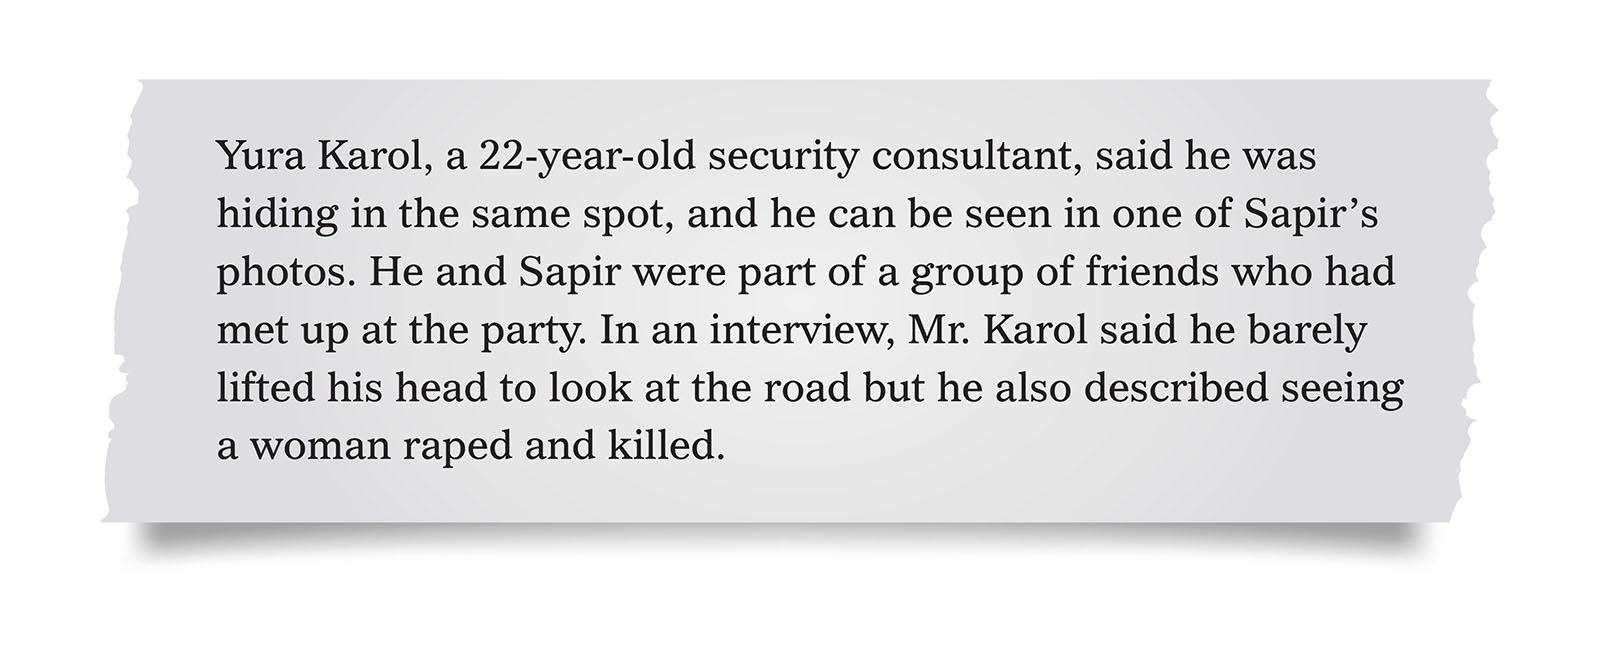 Pull quote:
Yura Karol, a 22-year-old security consultant, said he was hiding in the same spot, and he can be seen in one of Sapir’s photos. He and Sapir were part of a group of friends who had met up at the party. In an interview, Mr. Karol said he barely lifted his head to look at the road but he also described seeing a woman raped and killed.